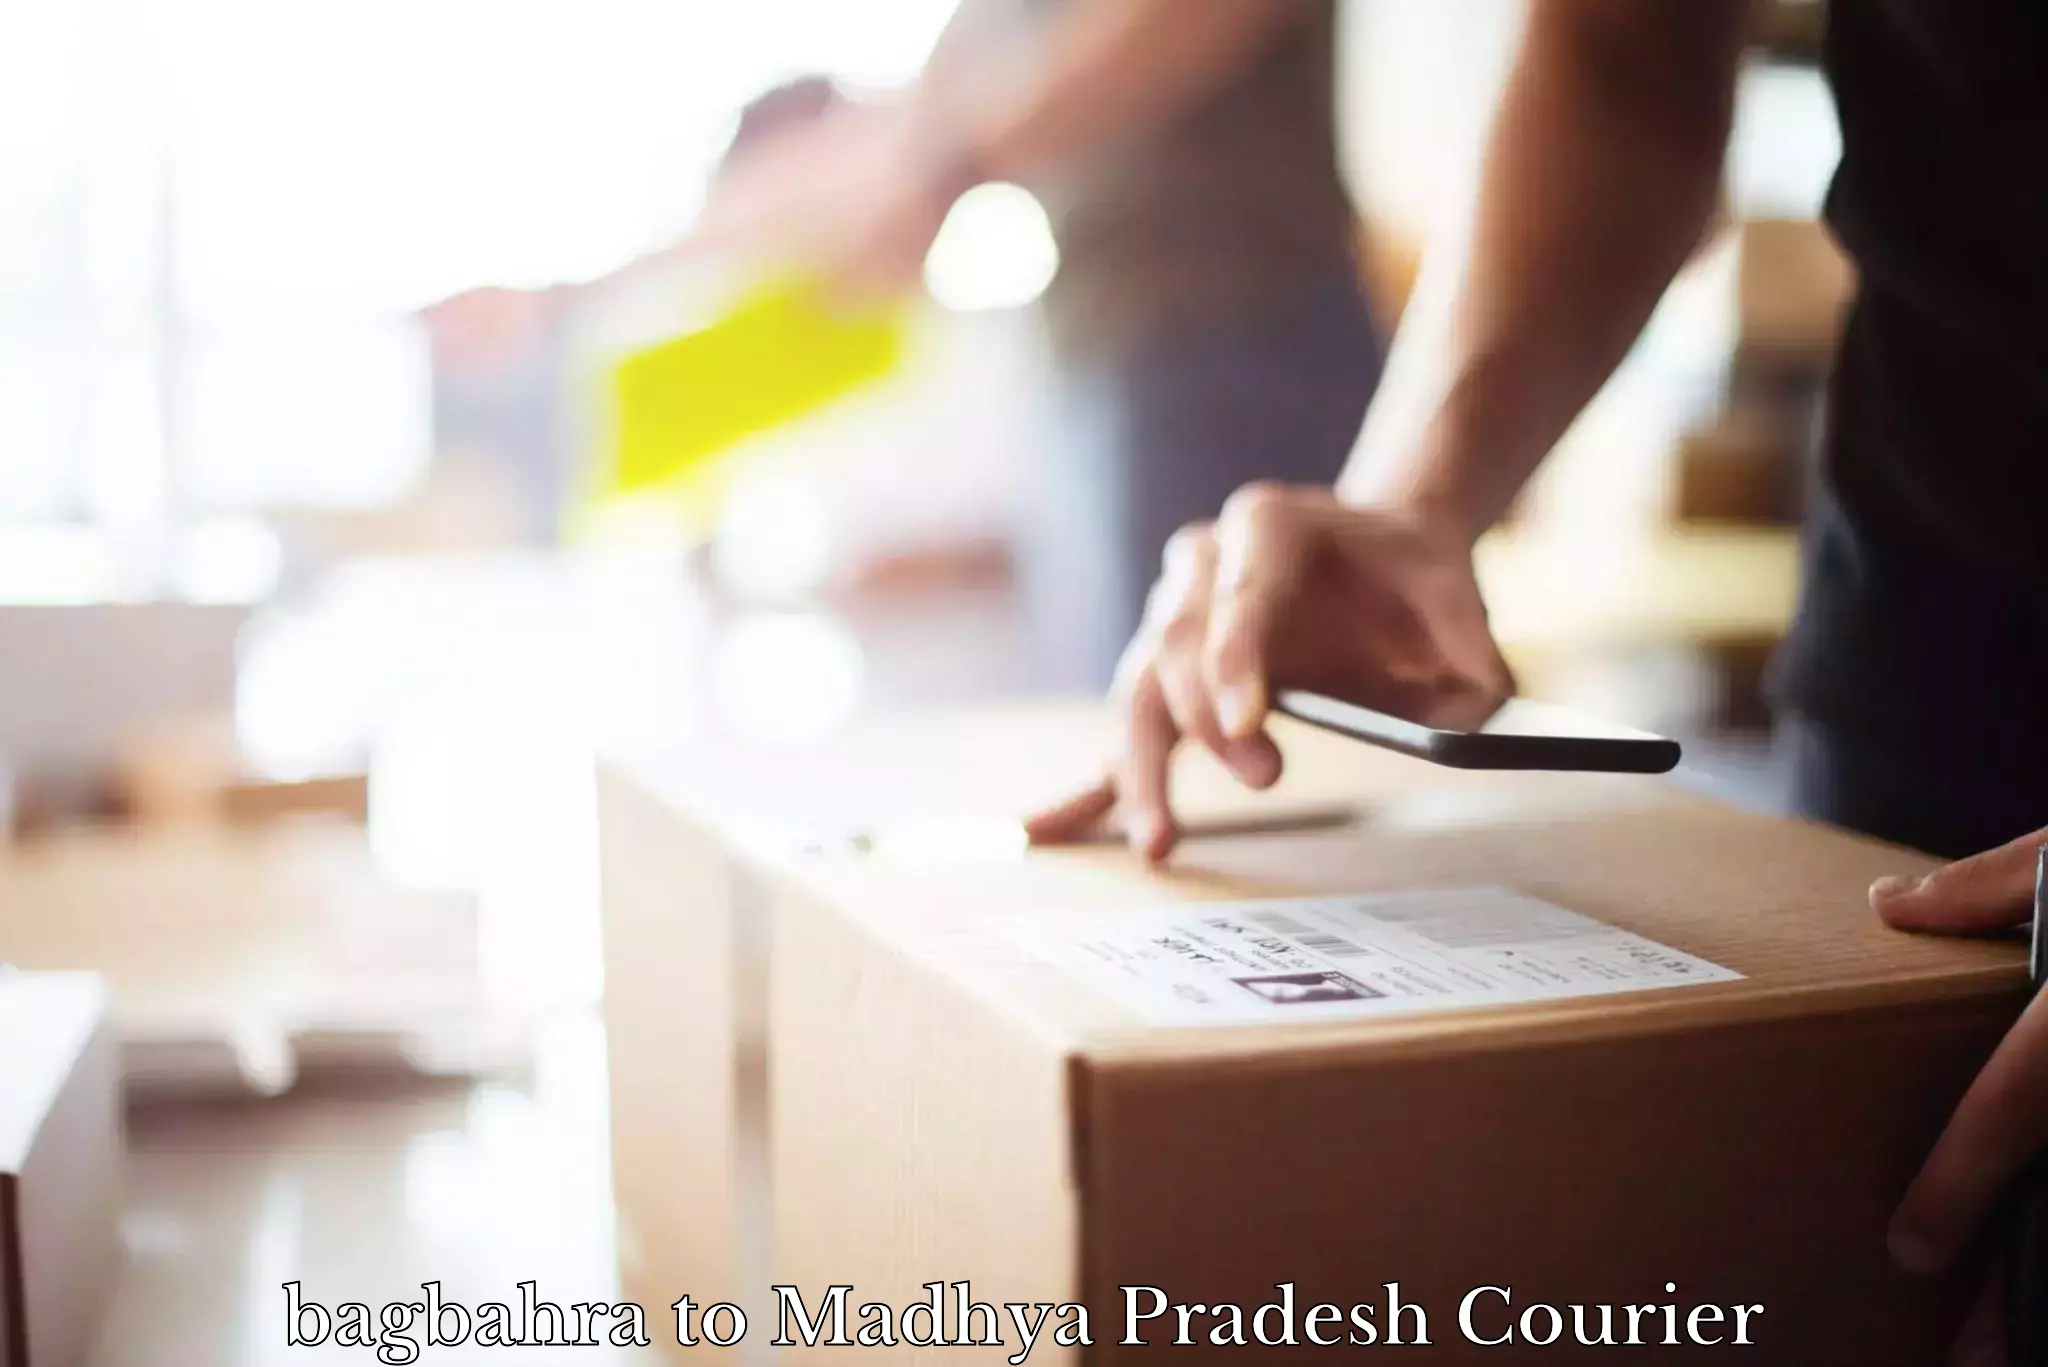 Courier service comparison in bagbahra to Madhya Pradesh